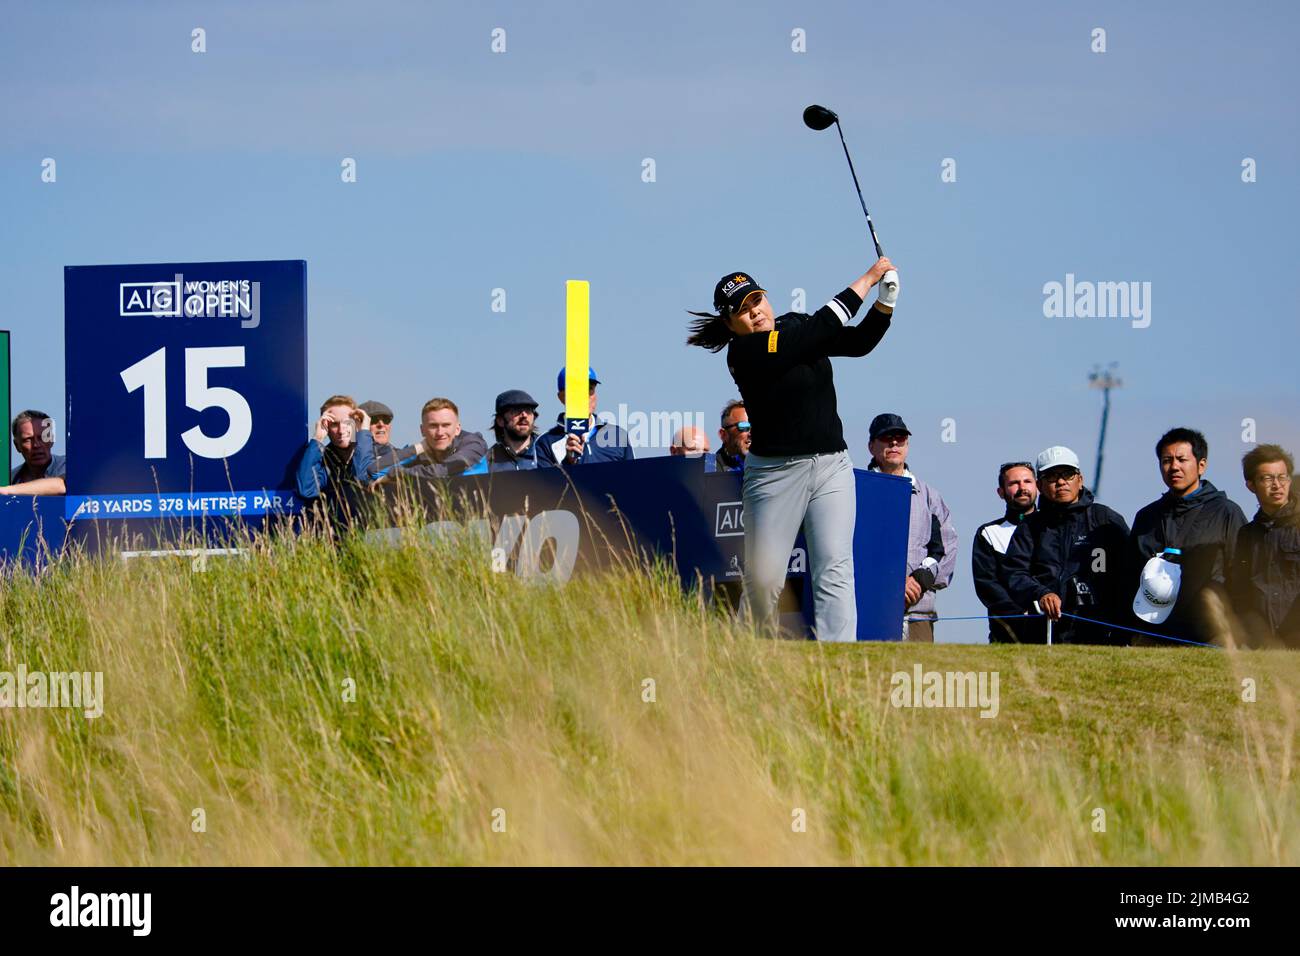 Gullane, Scotland, UK. 5th August 2022. Second round of the AIG Women’s Open golf championship at Muirfield in East Lothian. Pic; Inbee Park driver on 15th tee.  Iain Masterton/Alamy Live News Stock Photo